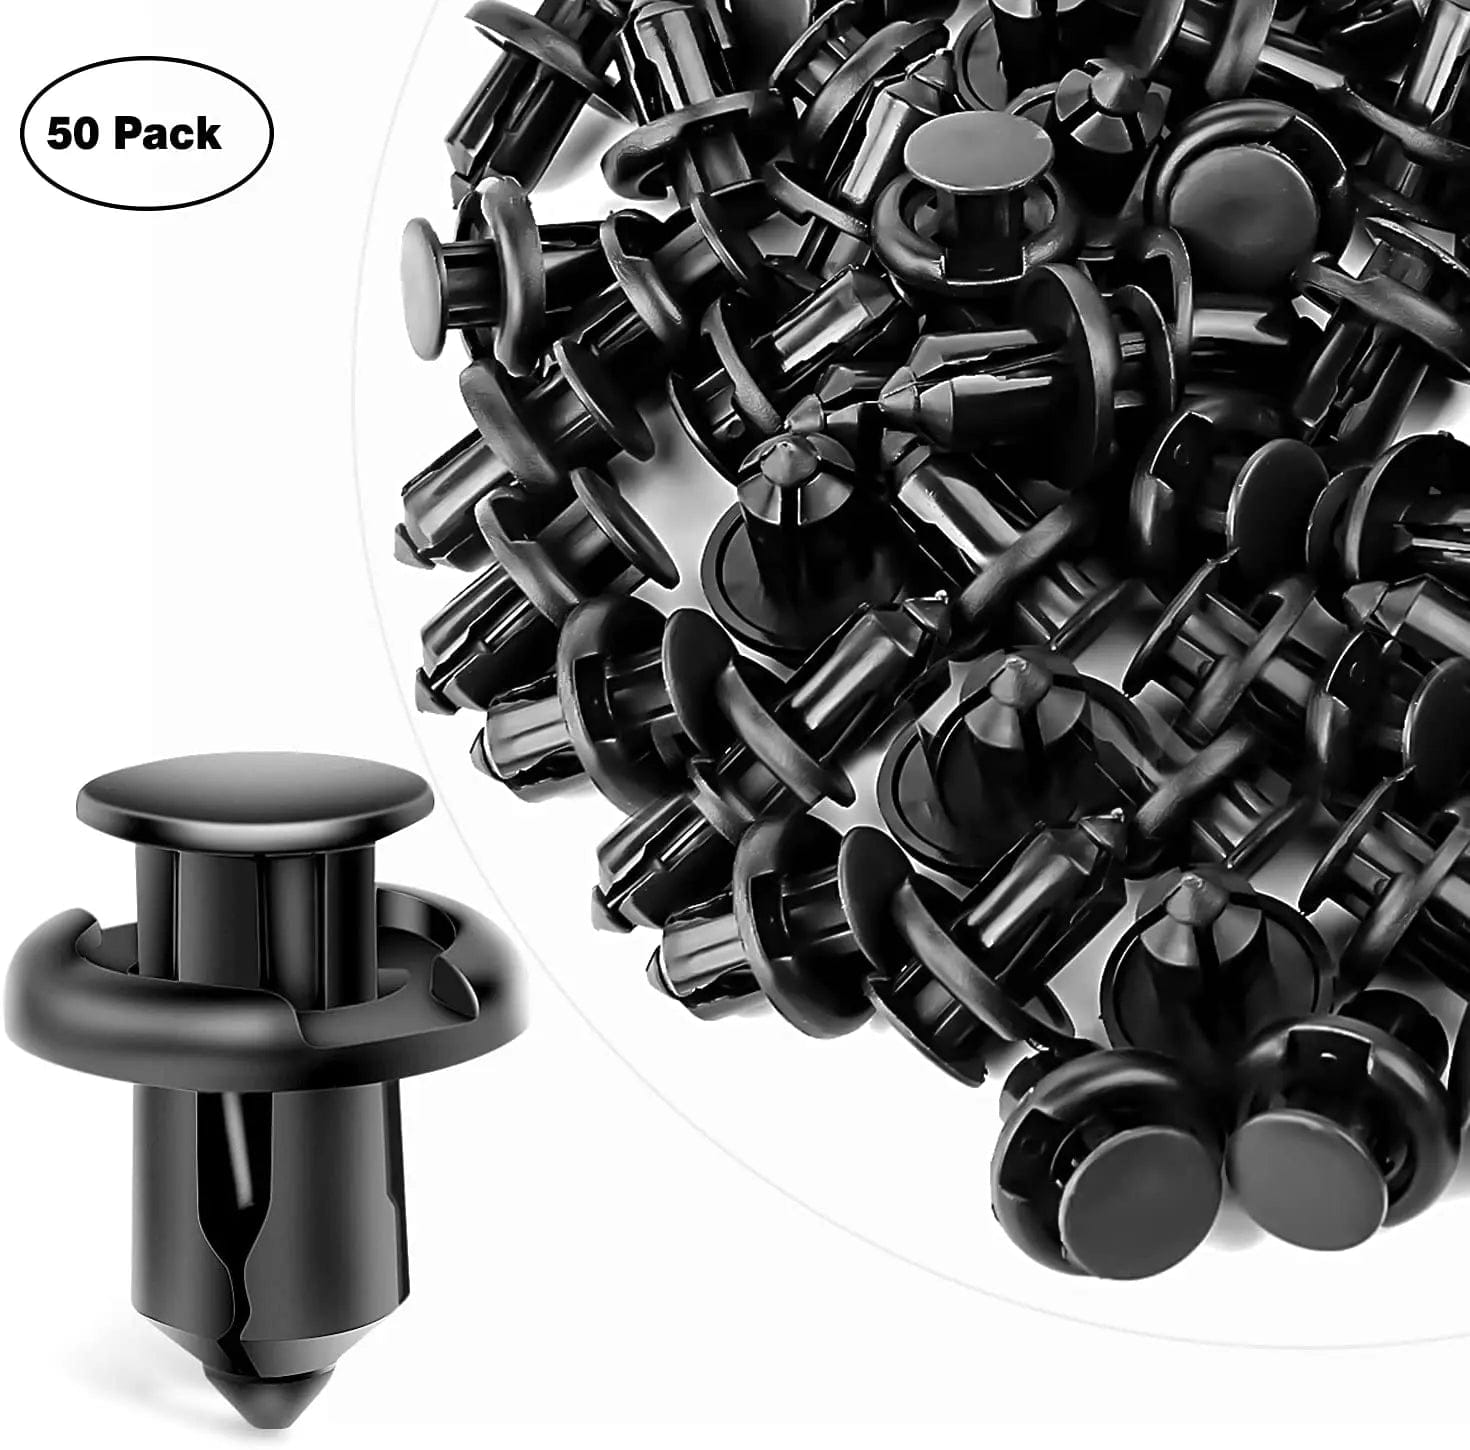 retainer clips 150 Pcs Car Push Retainer Clips Kits 2 Sizes Universal Auto Clips Fastener